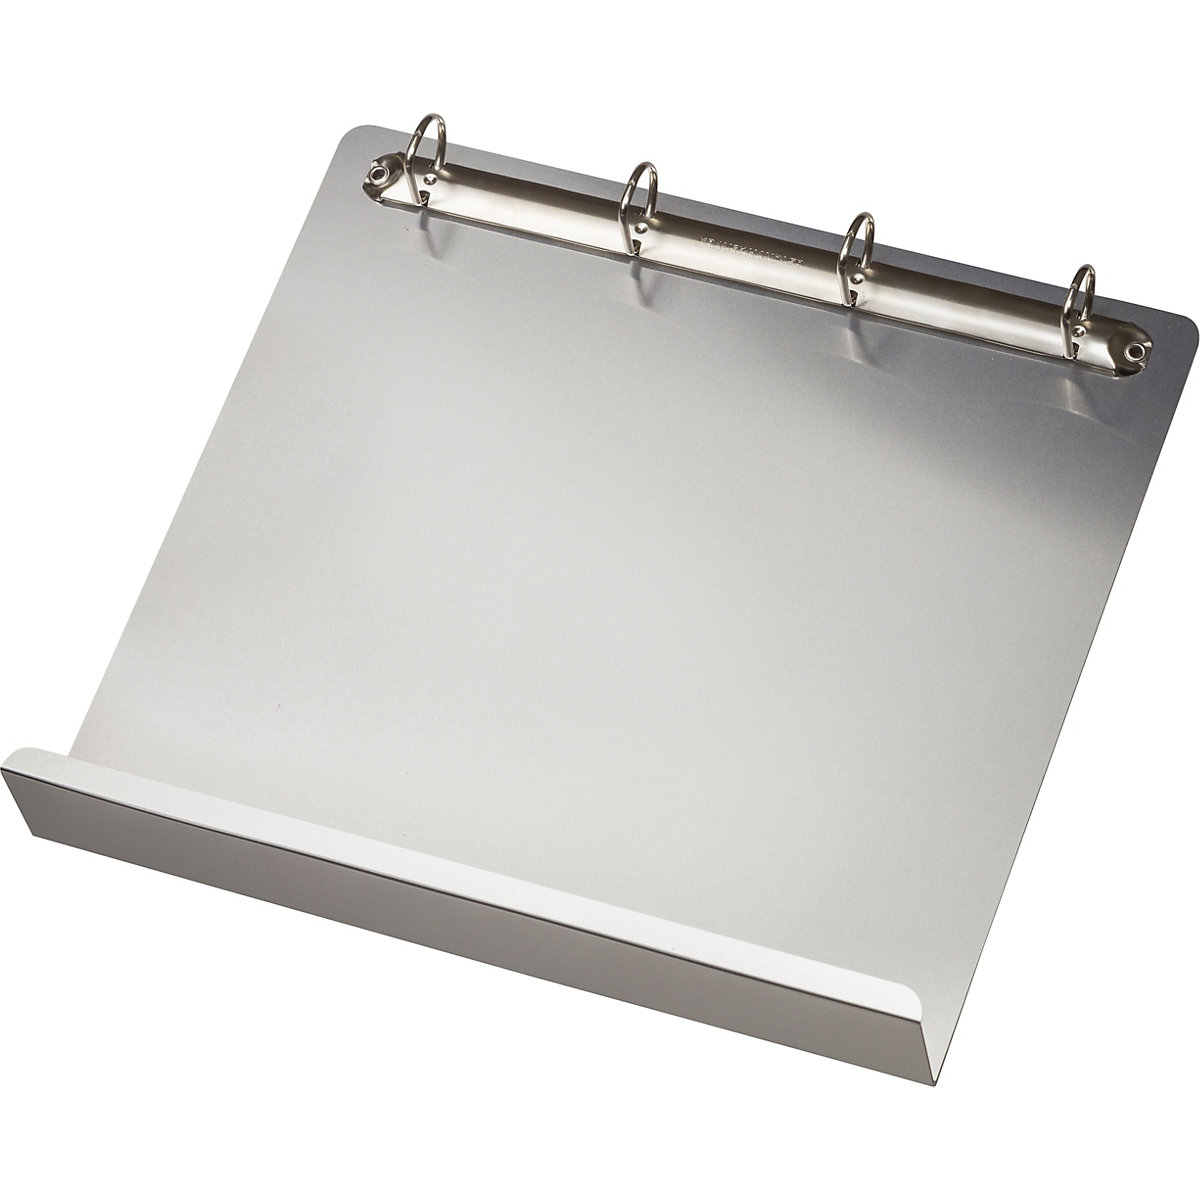 Magnetic 4-ring binder mechanism with rail - Tarifold